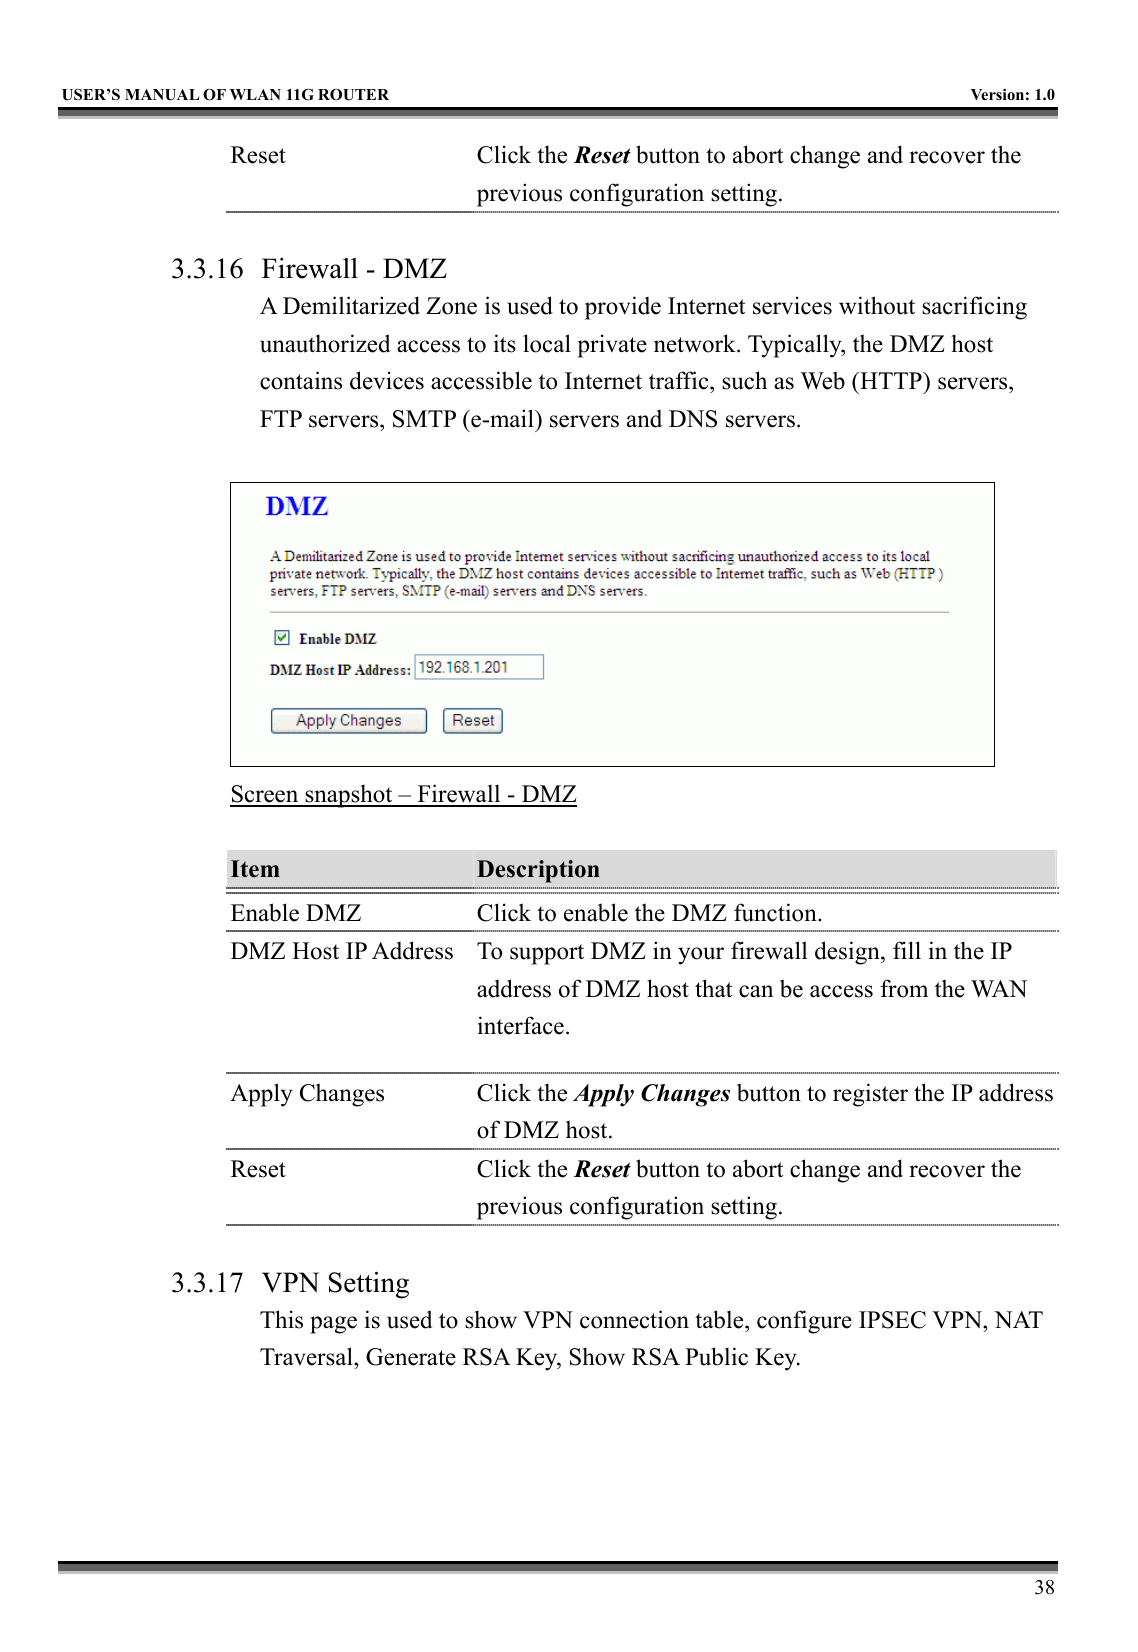   USER’S MANUAL OF WLAN 11G ROUTER    Version: 1.0     38 Reset Click the Reset button to abort change and recover the previous configuration setting.  3.3.16  Firewall - DMZ A Demilitarized Zone is used to provide Internet services without sacrificing unauthorized access to its local private network. Typically, the DMZ host contains devices accessible to Internet traffic, such as Web (HTTP) servers, FTP servers, SMTP (e-mail) servers and DNS servers.   Screen snapshot – Firewall - DMZ  Item  Description   Enable DMZ  Click to enable the DMZ function. DMZ Host IP Address  To support DMZ in your firewall design, fill in the IP address of DMZ host that can be access from the WAN interface. Apply Changes  Click the Apply Changes button to register the IP address of DMZ host. Reset Click the Reset button to abort change and recover the previous configuration setting.  3.3.17 VPN Setting This page is used to show VPN connection table, configure IPSEC VPN, NAT Traversal, Generate RSA Key, Show RSA Public Key.  